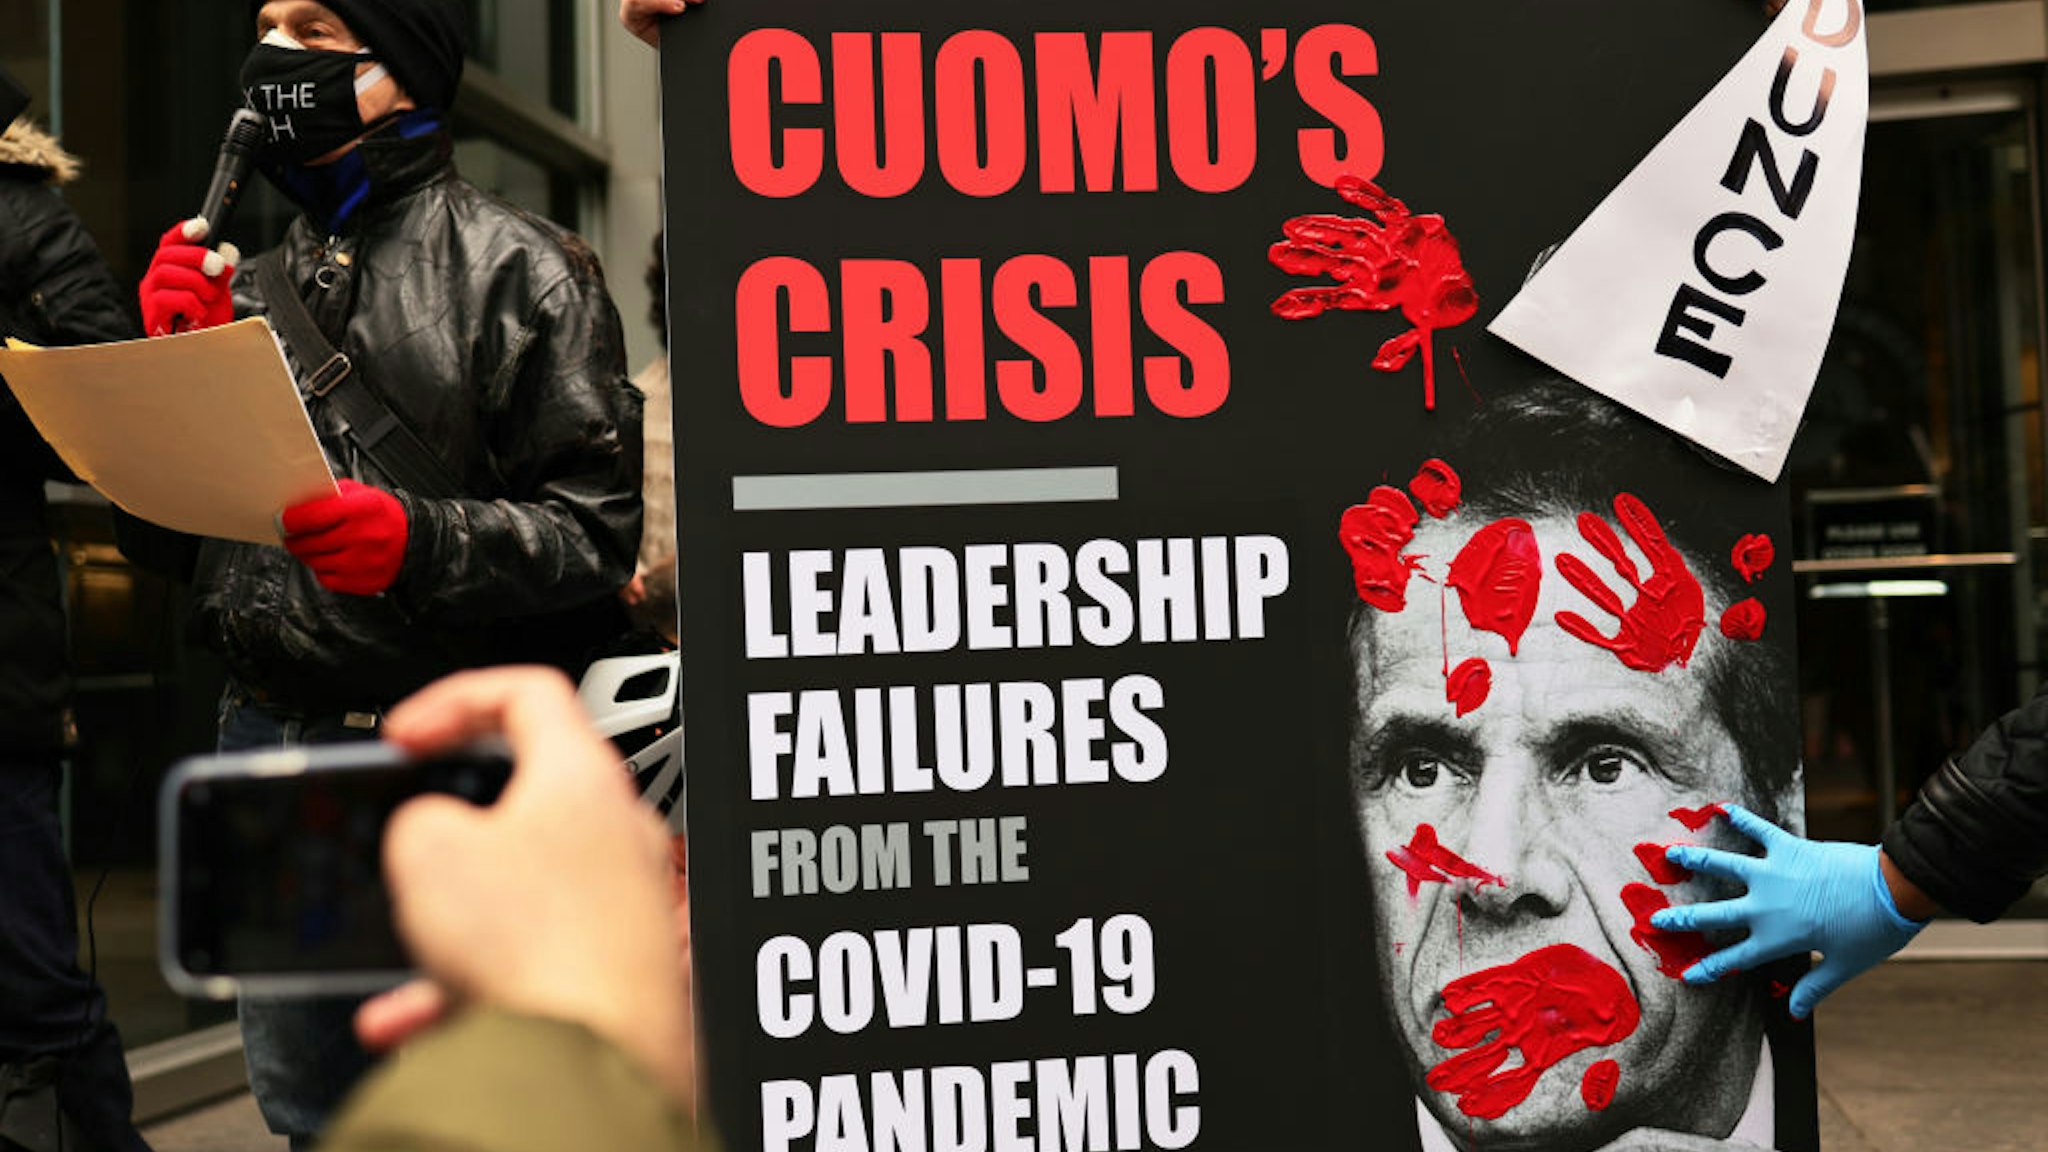 A person places his red painted hands on a poster of Gov. Andrew Cuomo's book as people gather outside of his NYC office to protest against cuts to health care on March 01, 2021 in New York City.